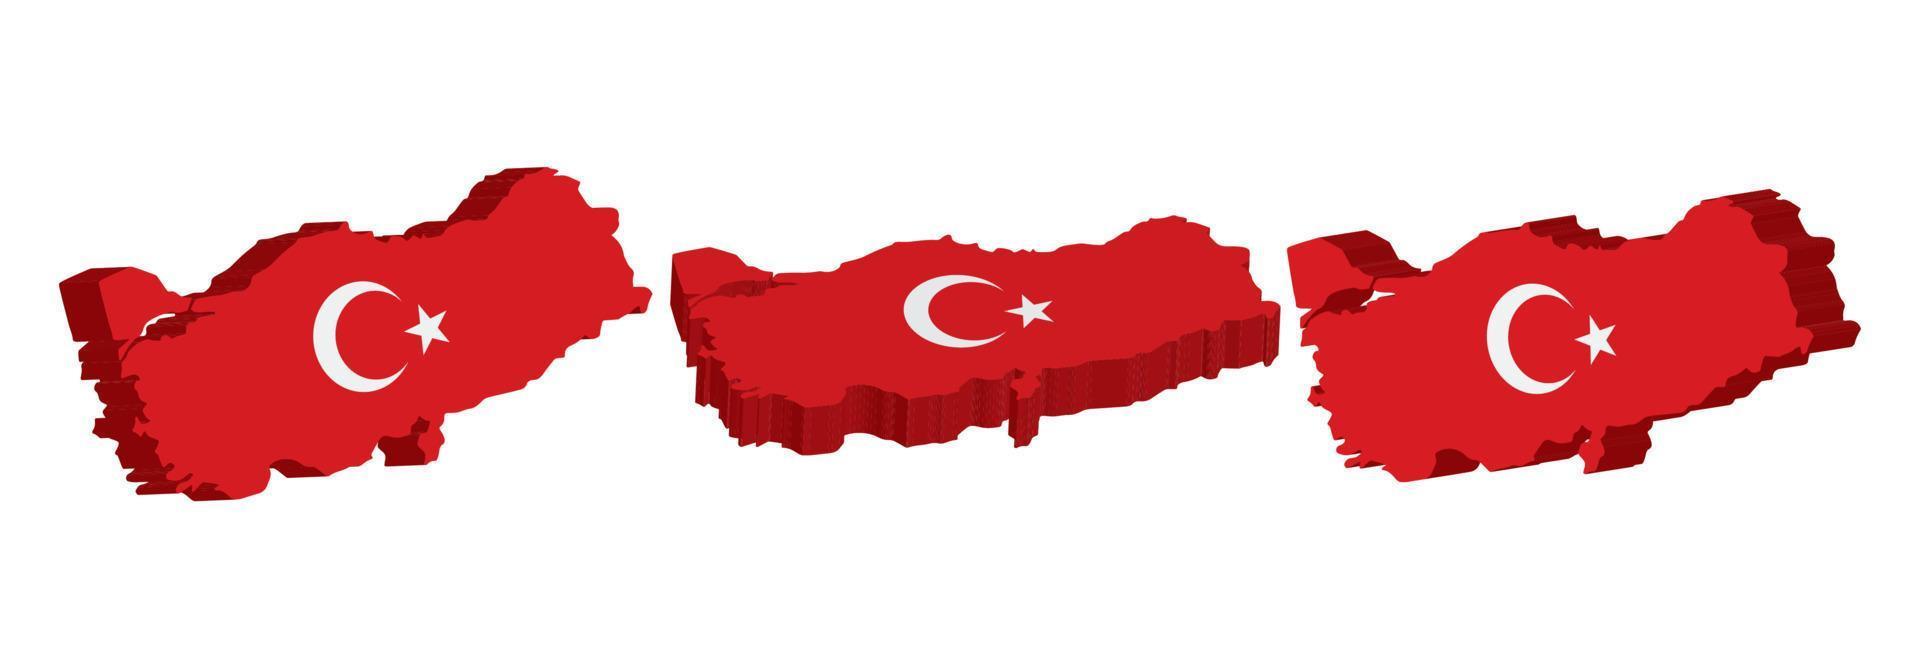 Realistic 3D Map of Turkey Vector Design Template